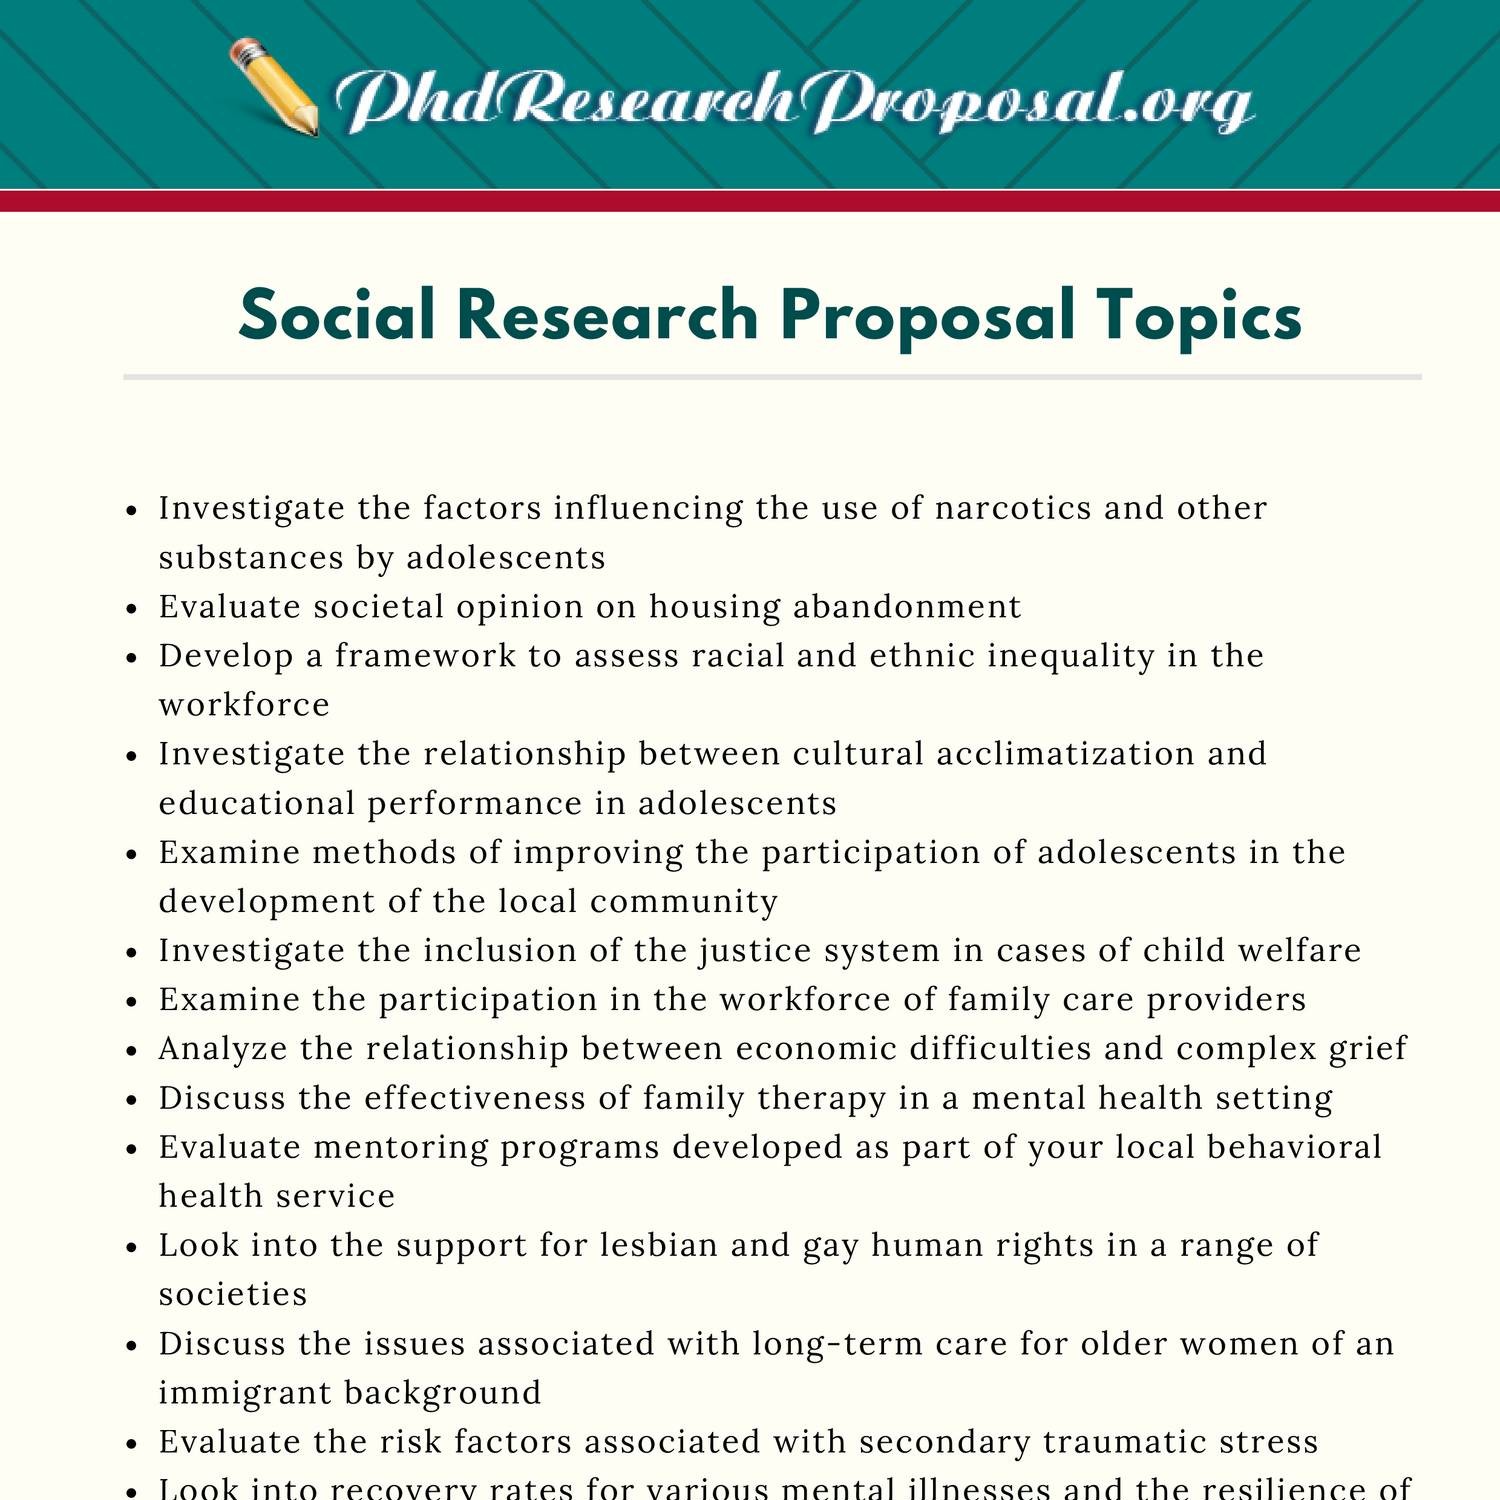 social work related research topics